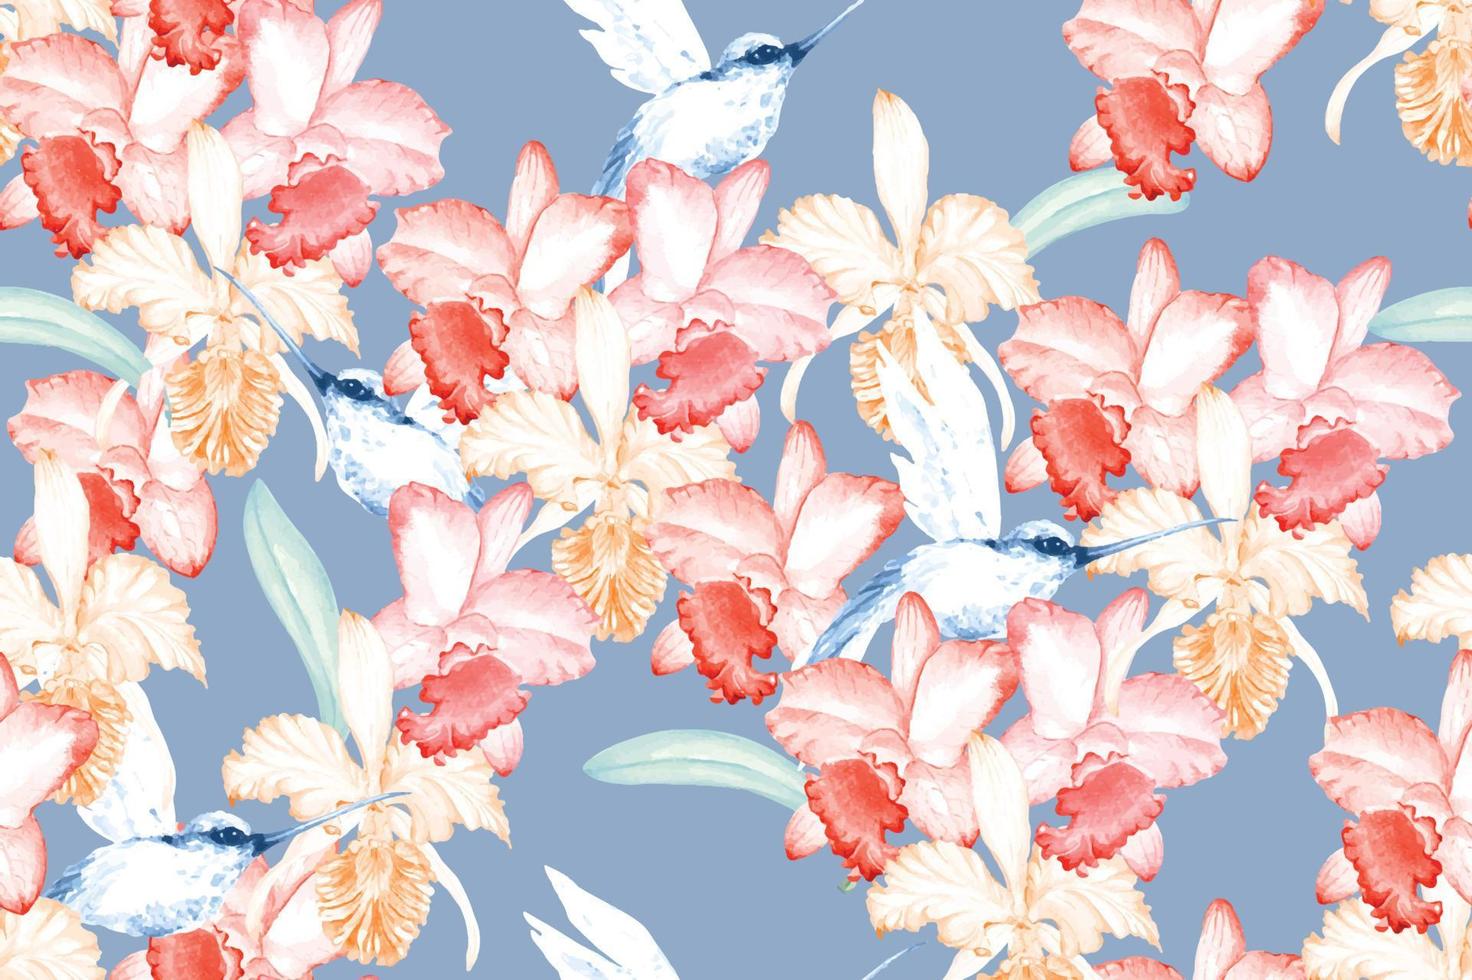 Seamless pattern of hummingbird and orchids painted with watercolor on blue background.For floral patterns painted with watercolors with elegant patterns for destroying fabrics and wallpapers. vector